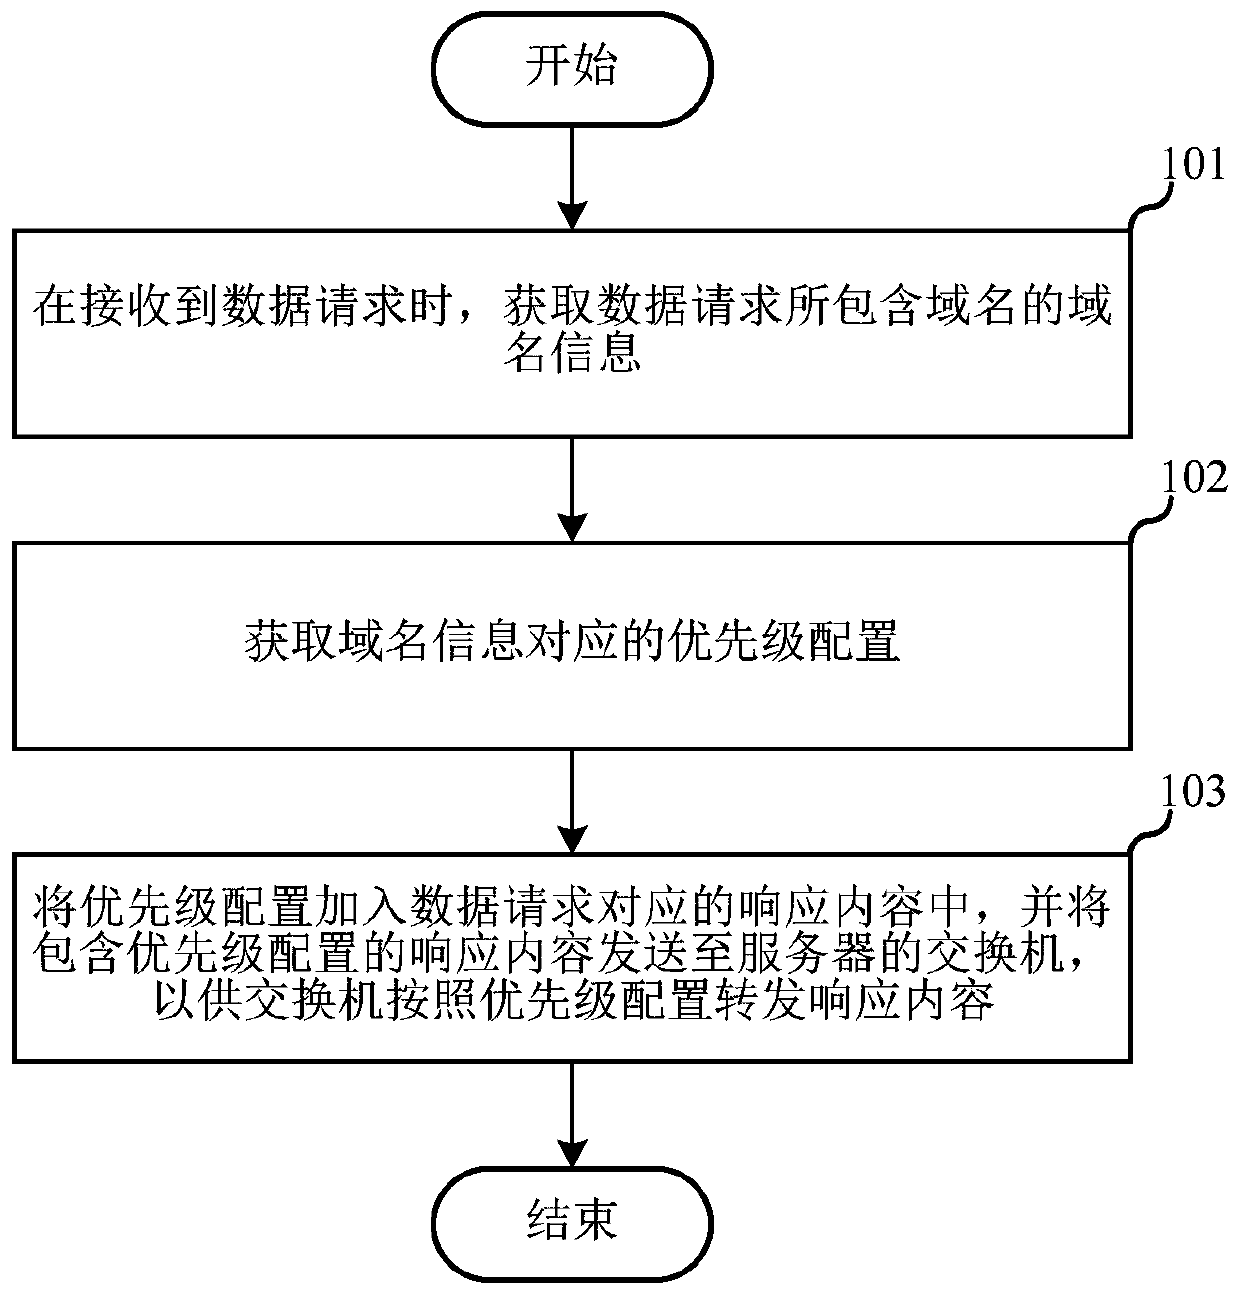 Data request processing method, server and switch